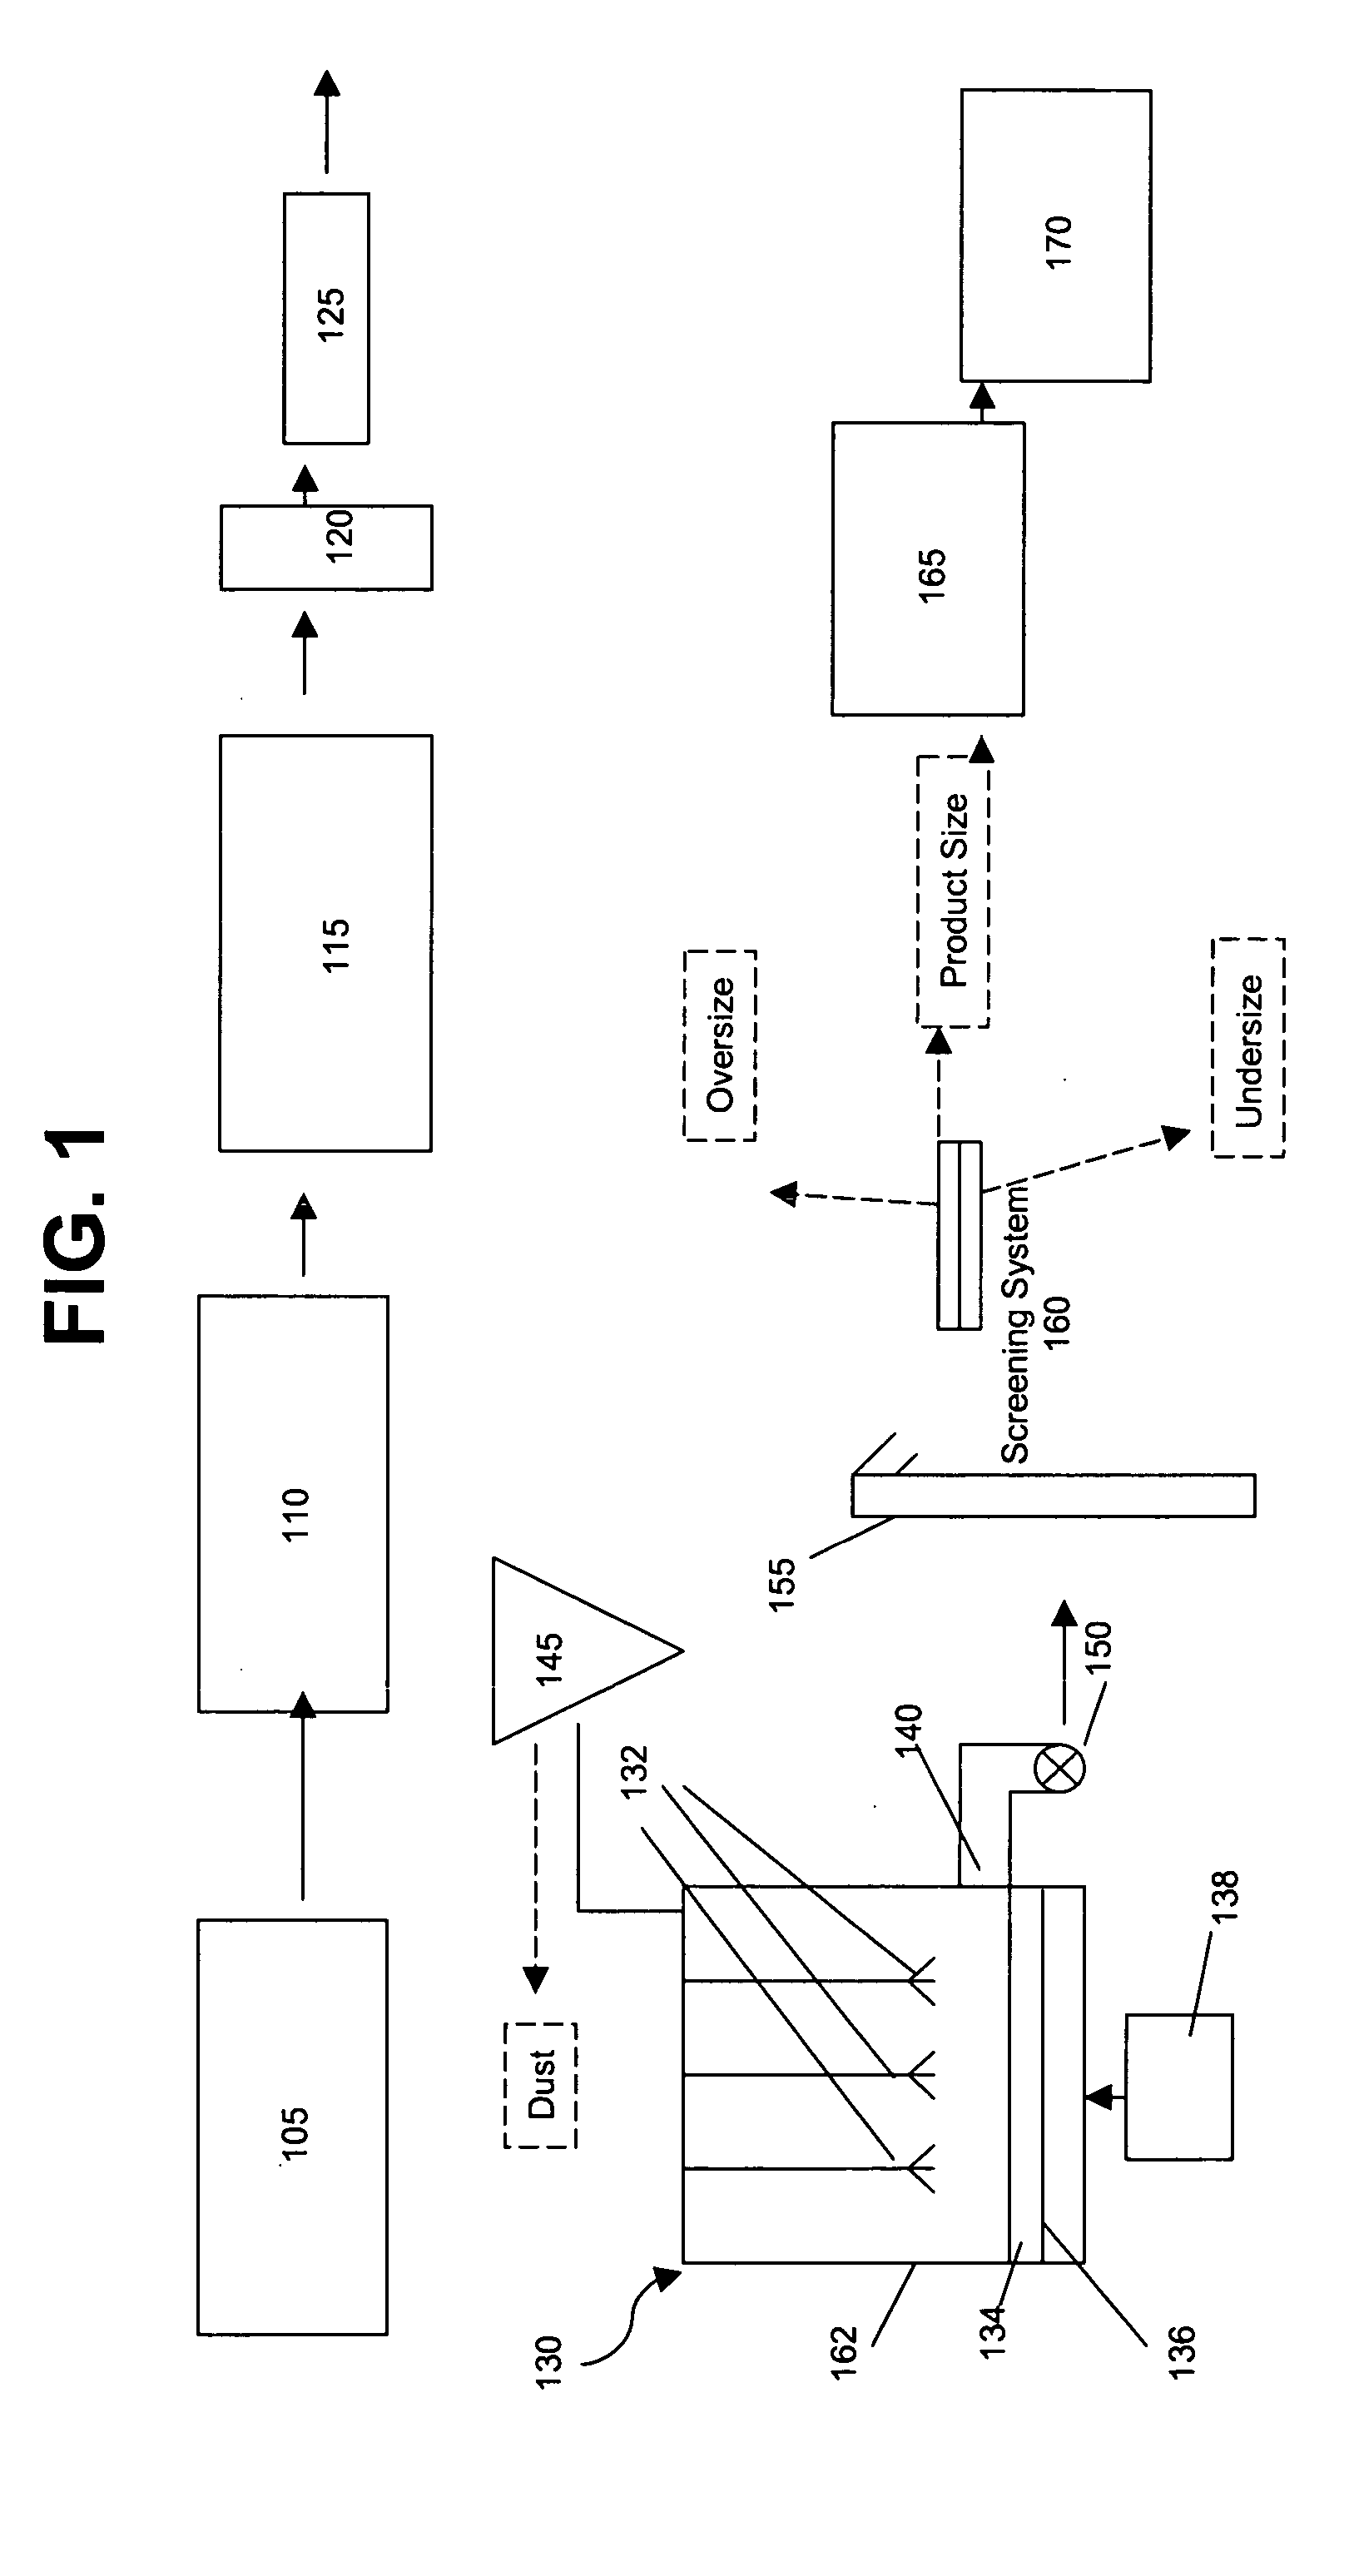 Methods for producing sintered particles from a slurry of an alumina-containing raw material